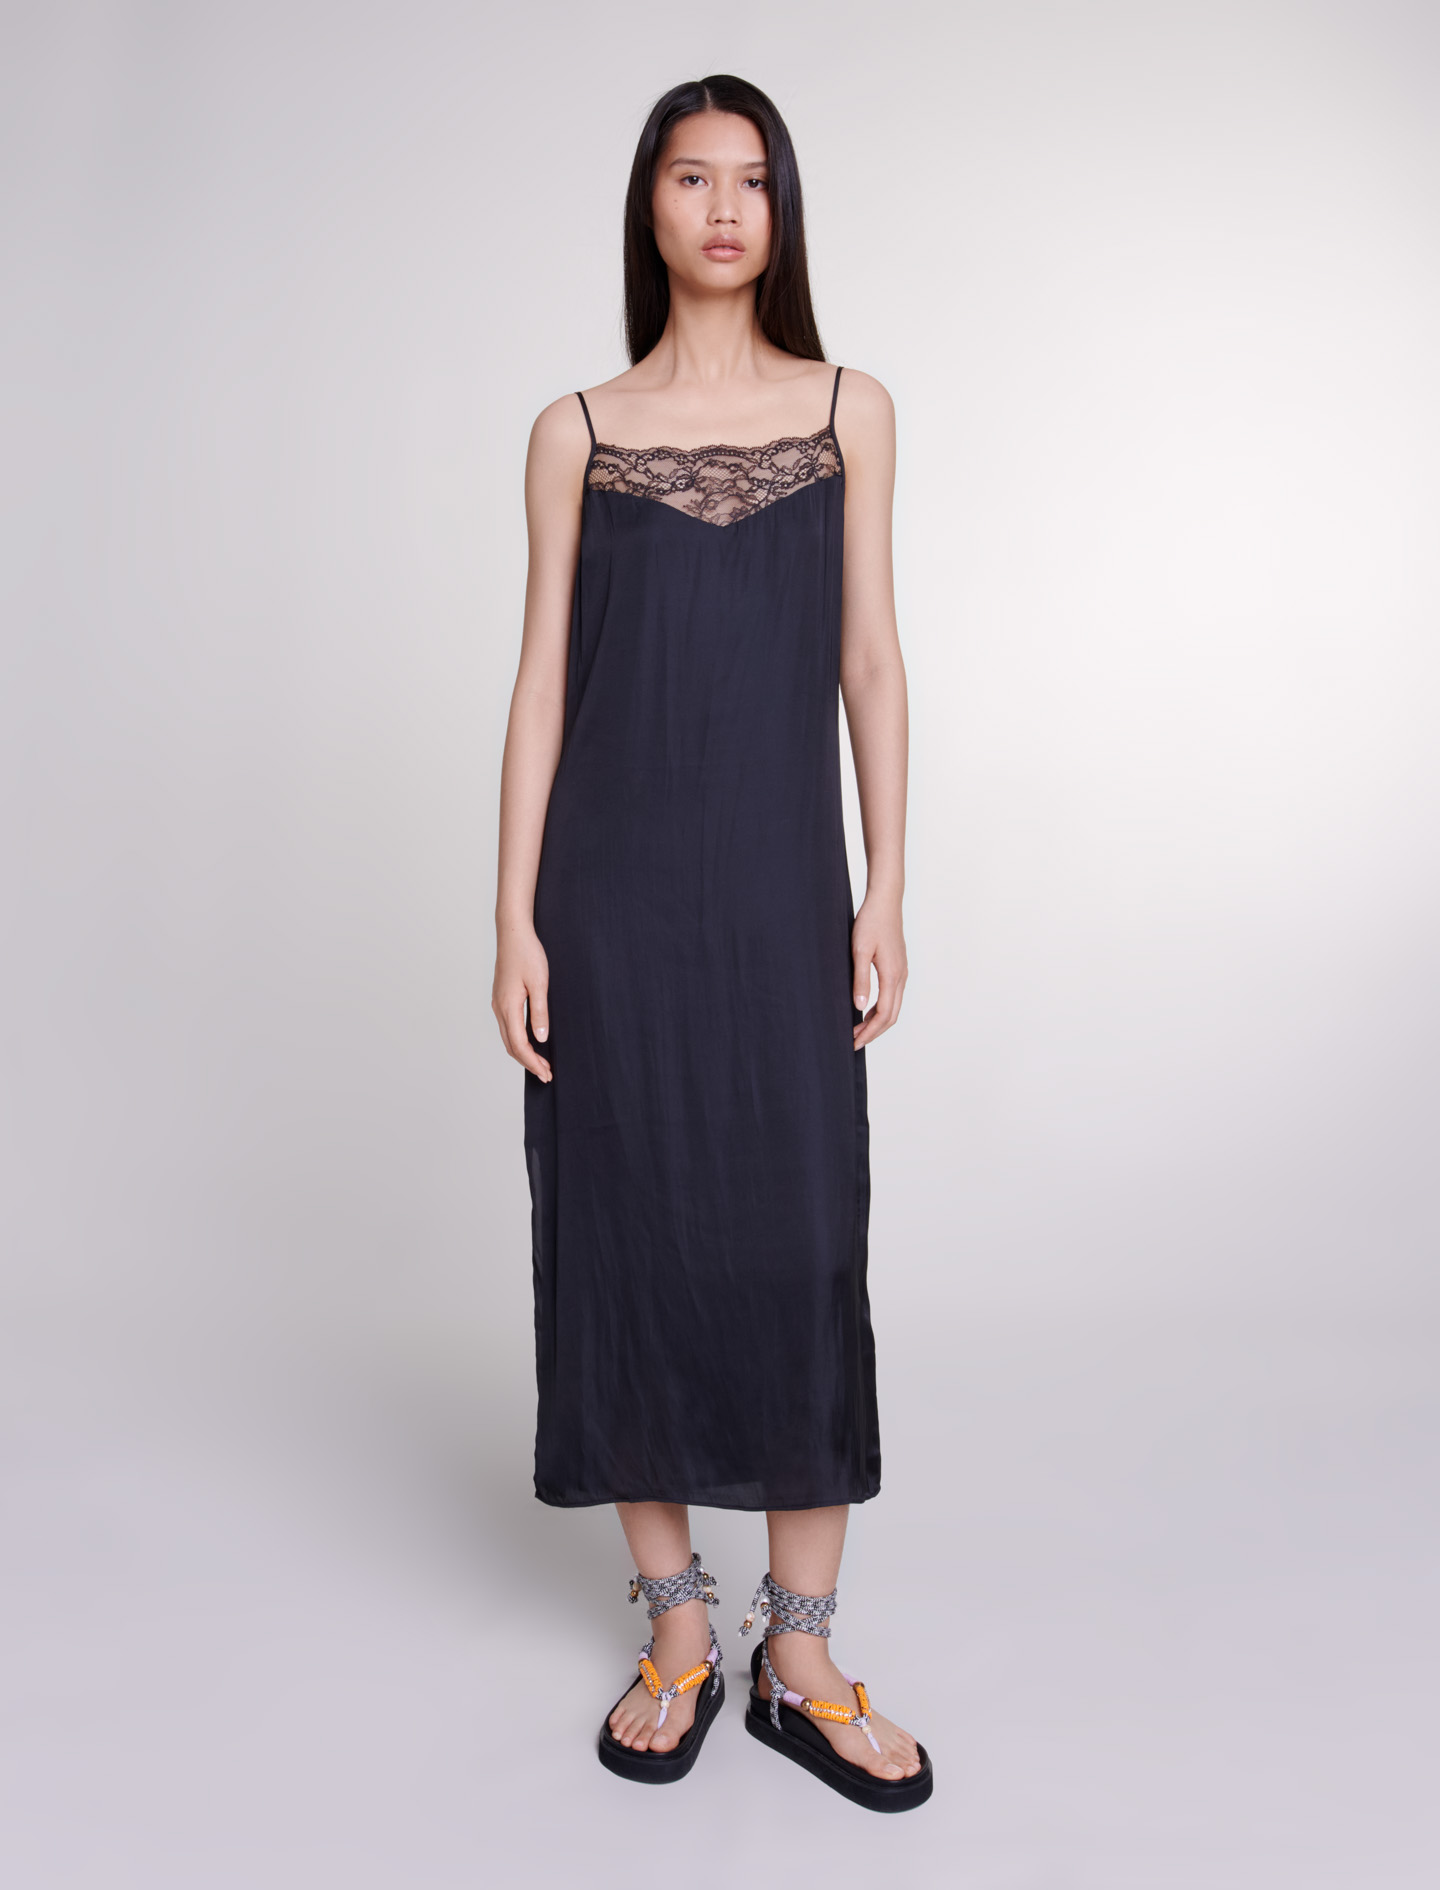 Maje Woman's polyester Lace: Long satin dress for Spring/Summer, in color Black / Black